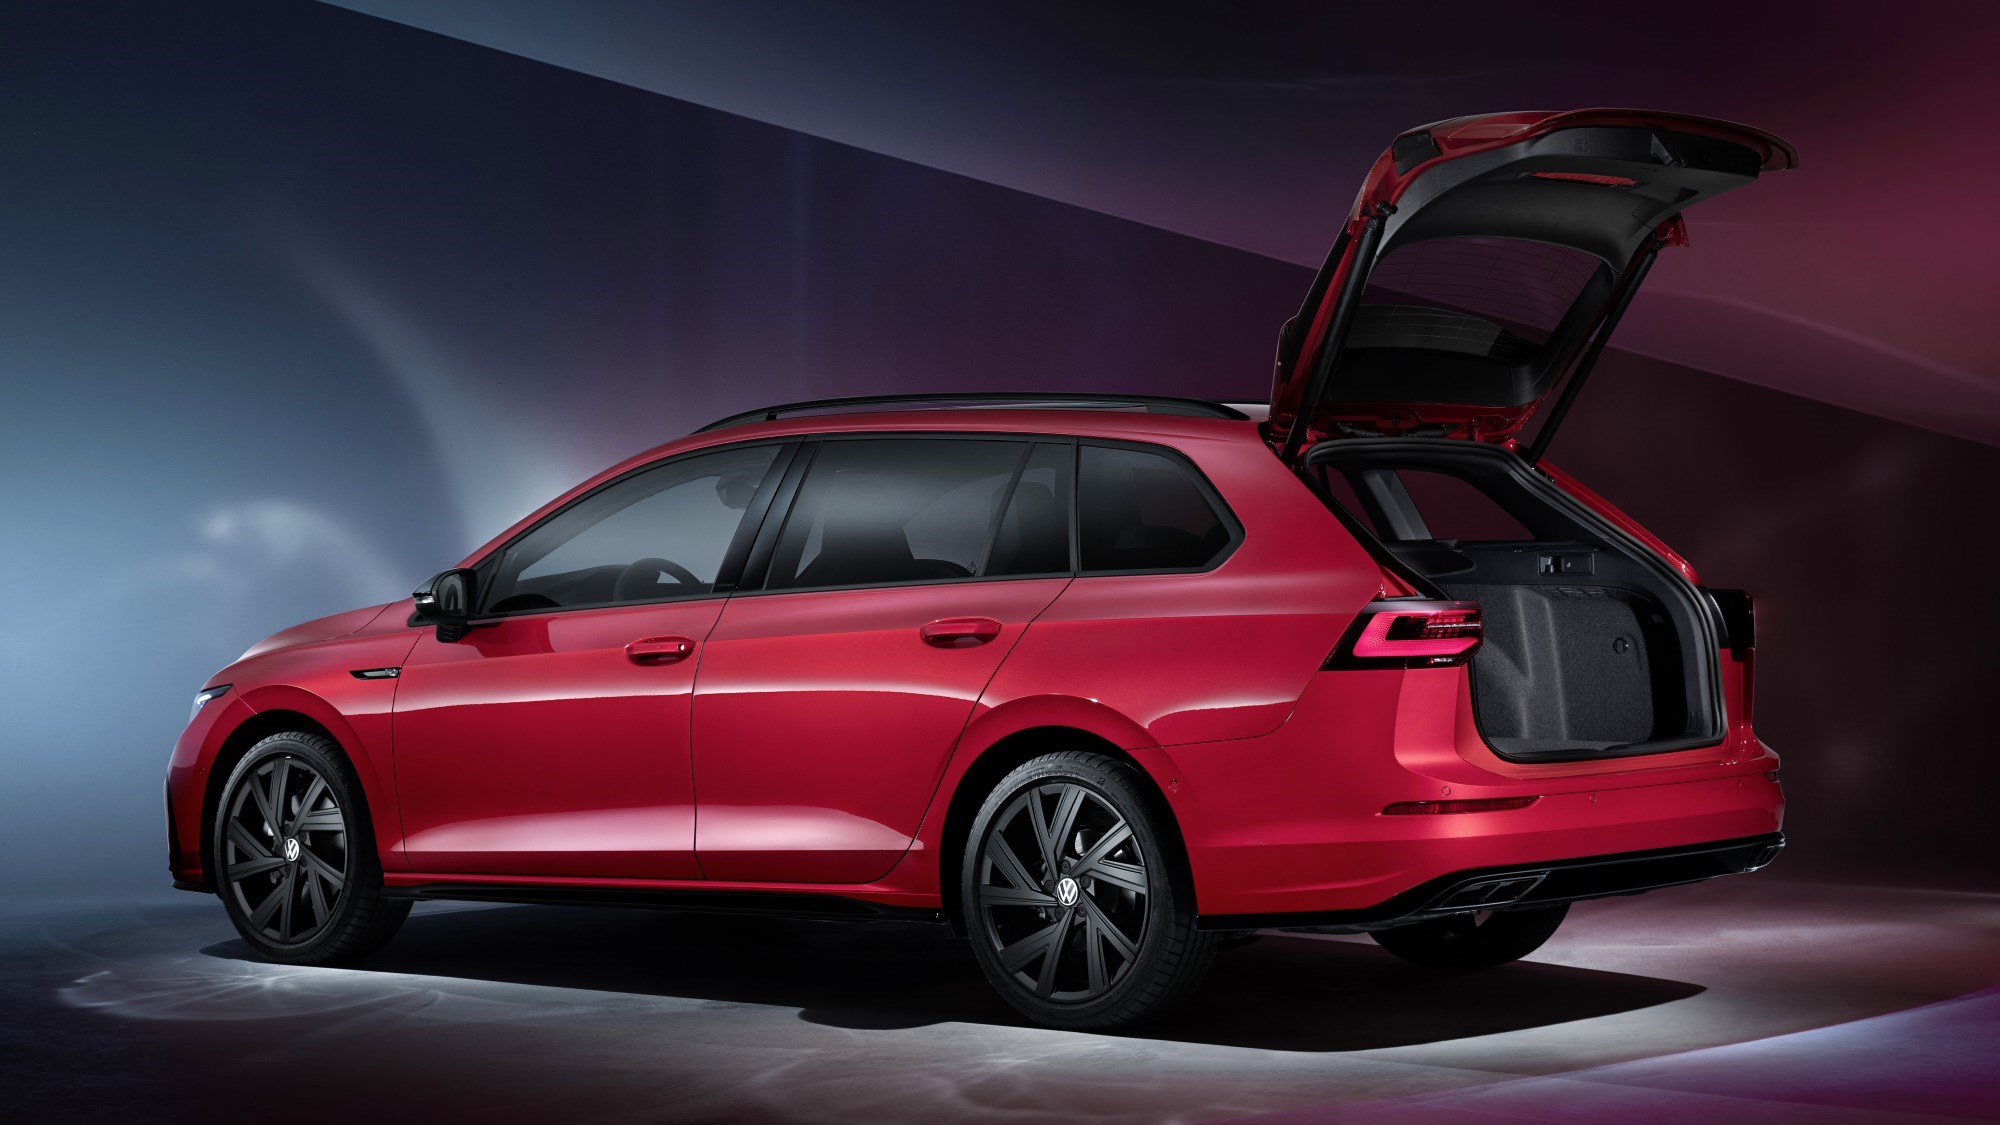 2023 Volkswagen Golf GTI Interior Dimensions: Seating, Cargo Space & Trunk  Size - Photos